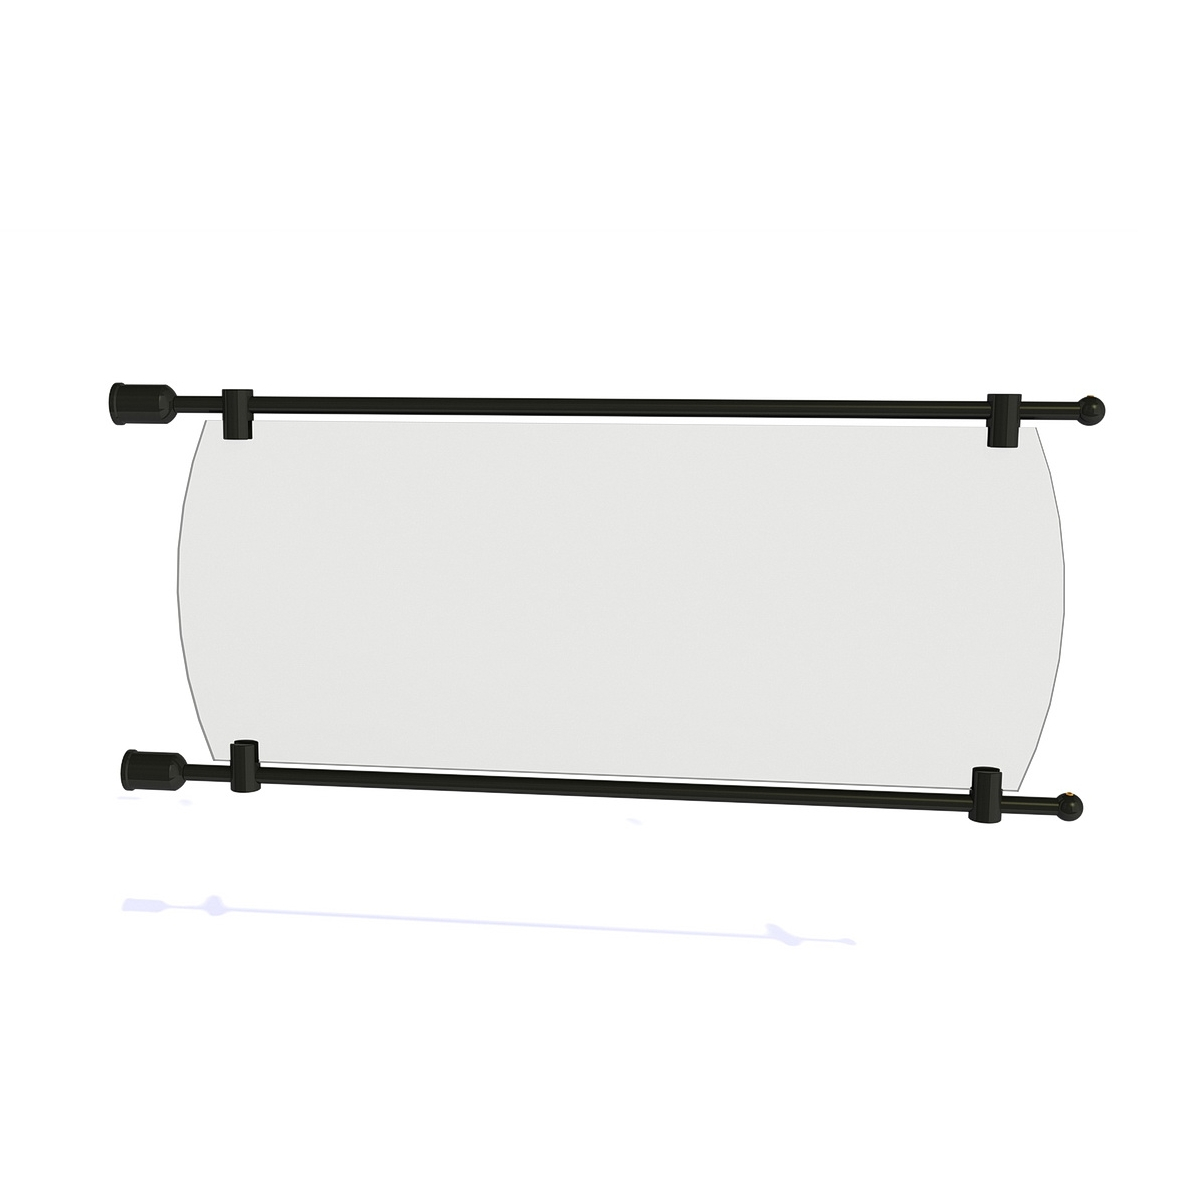 Set of 2, 3/8'' Diameter Rod Projecting Sign, Aluminum Black Matte Anodized , 21 13/16”. Material thickness up to 5/16”